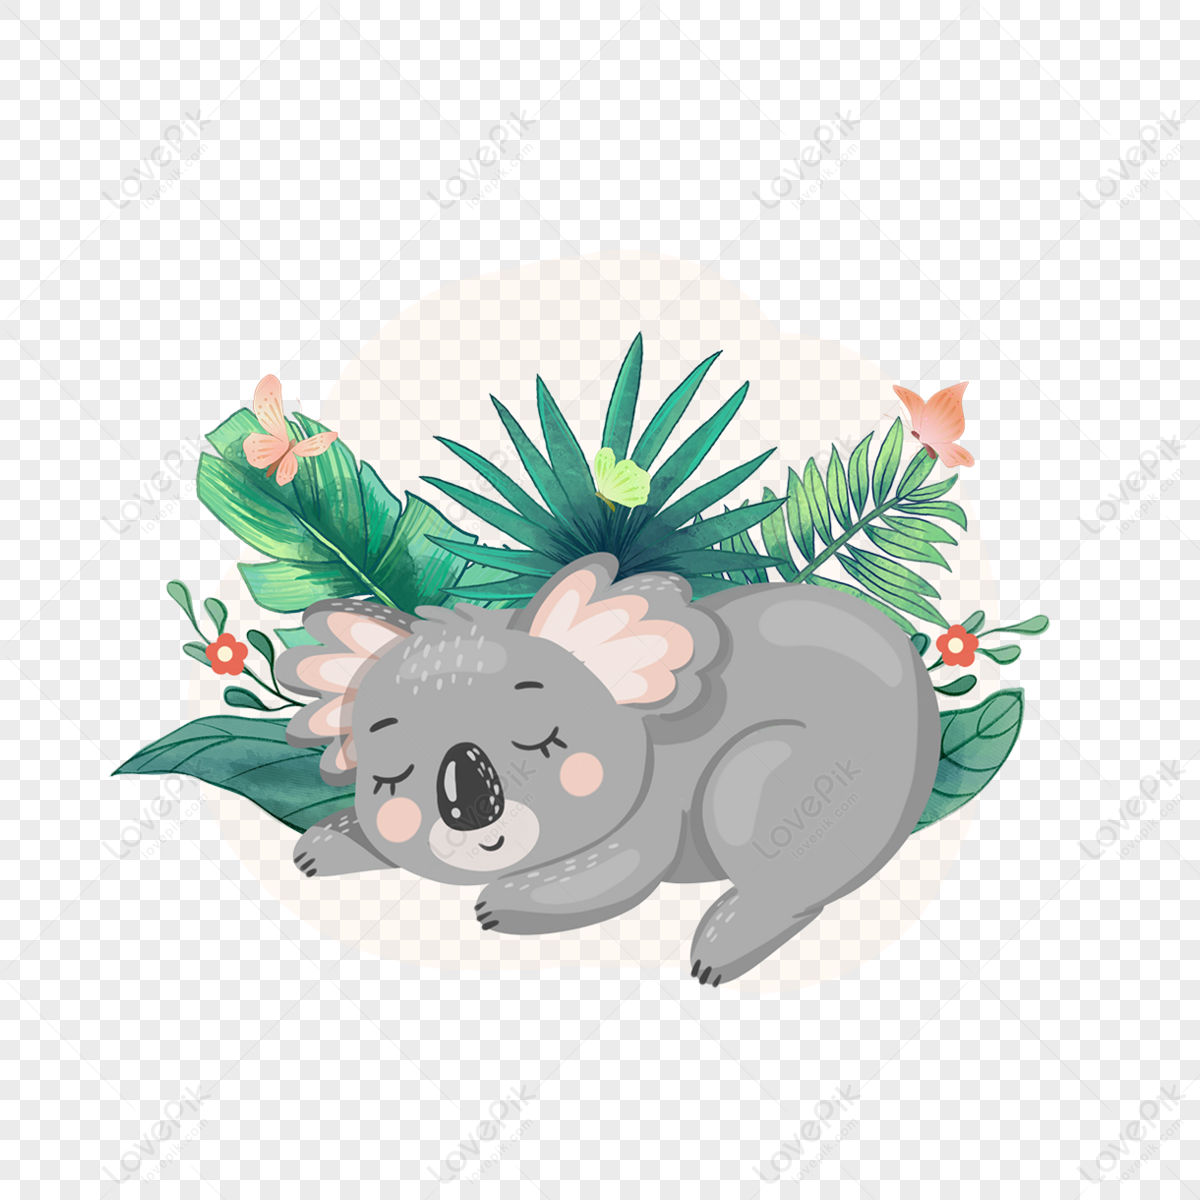 Koala sleeping summer animal clipart,tropical plants,sleeping animals,butterfly png free download